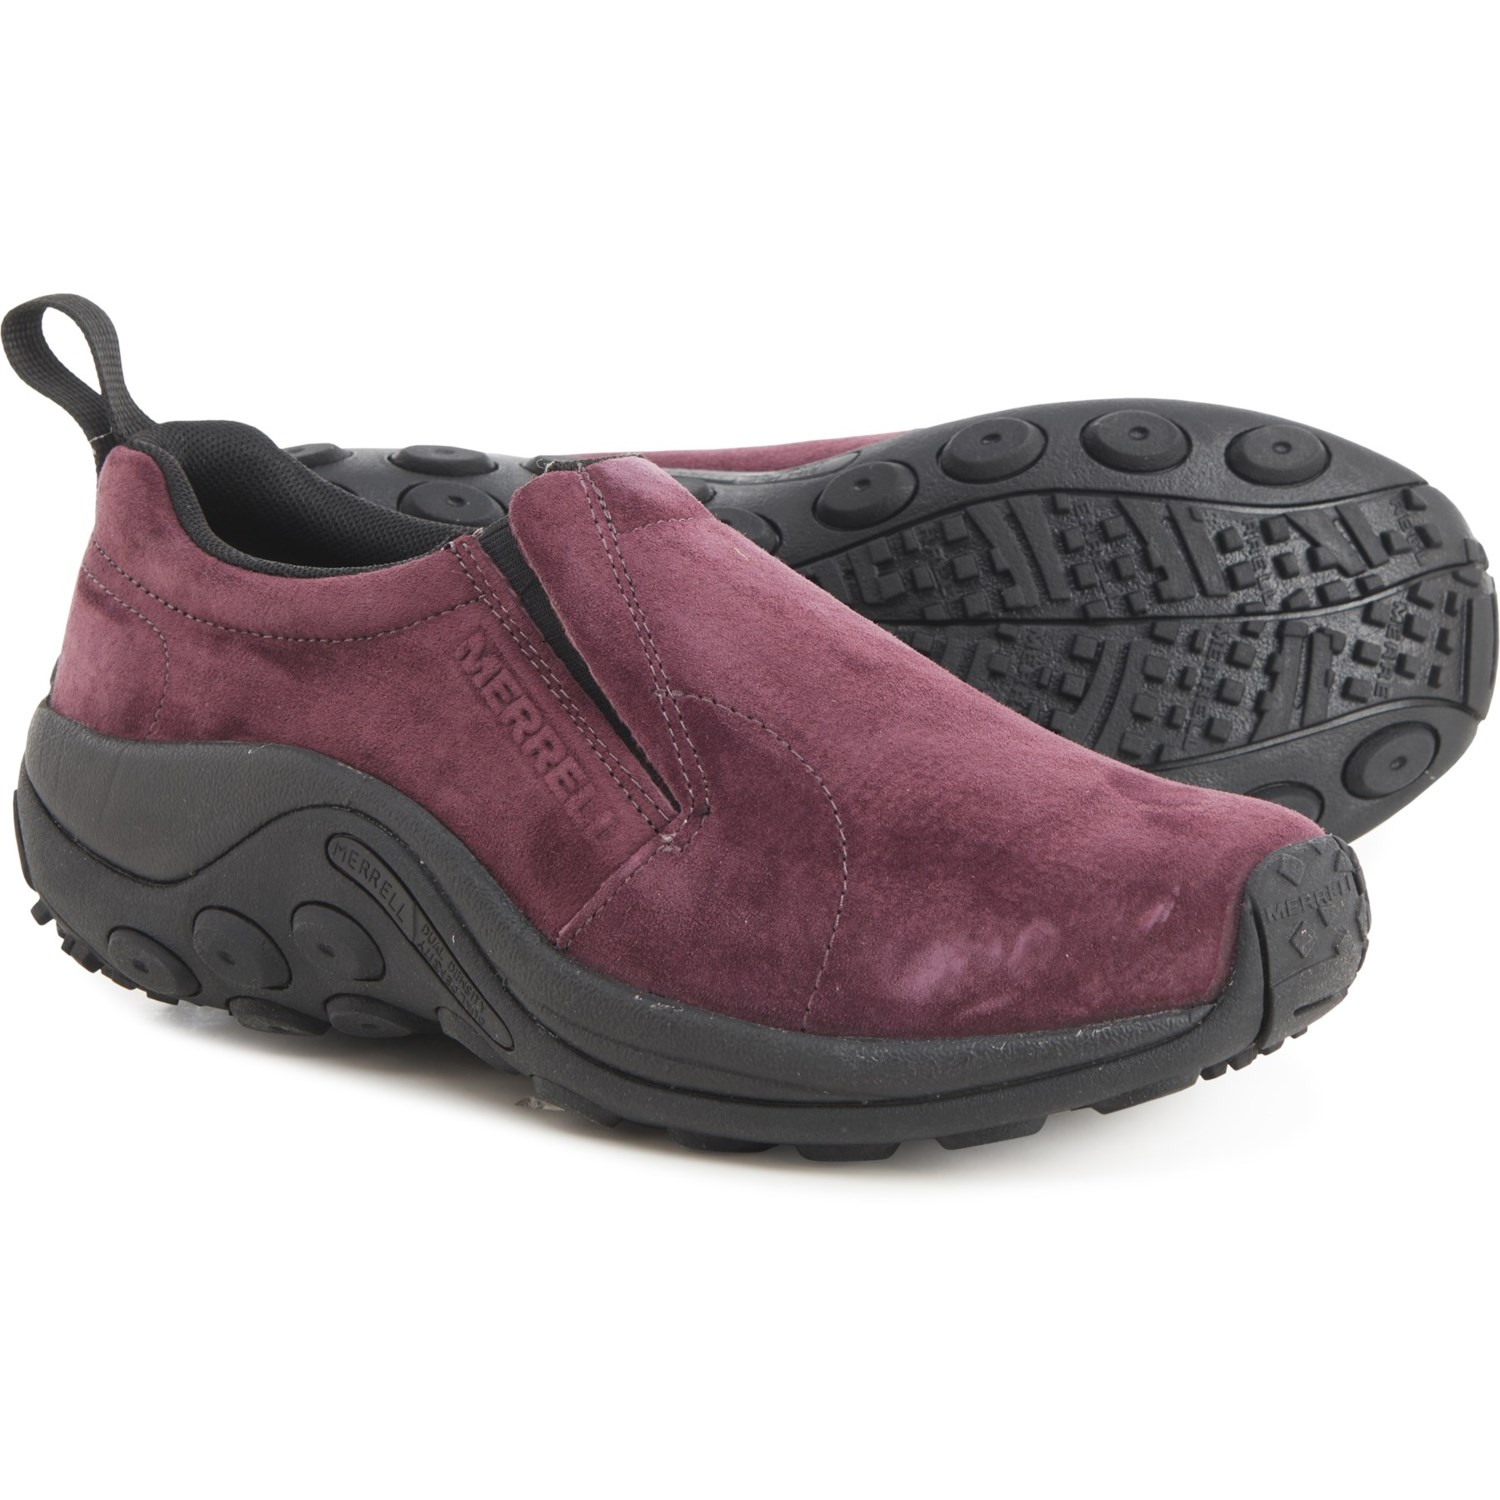 Merrell Jungle Moc Shoes (For Women) - Save